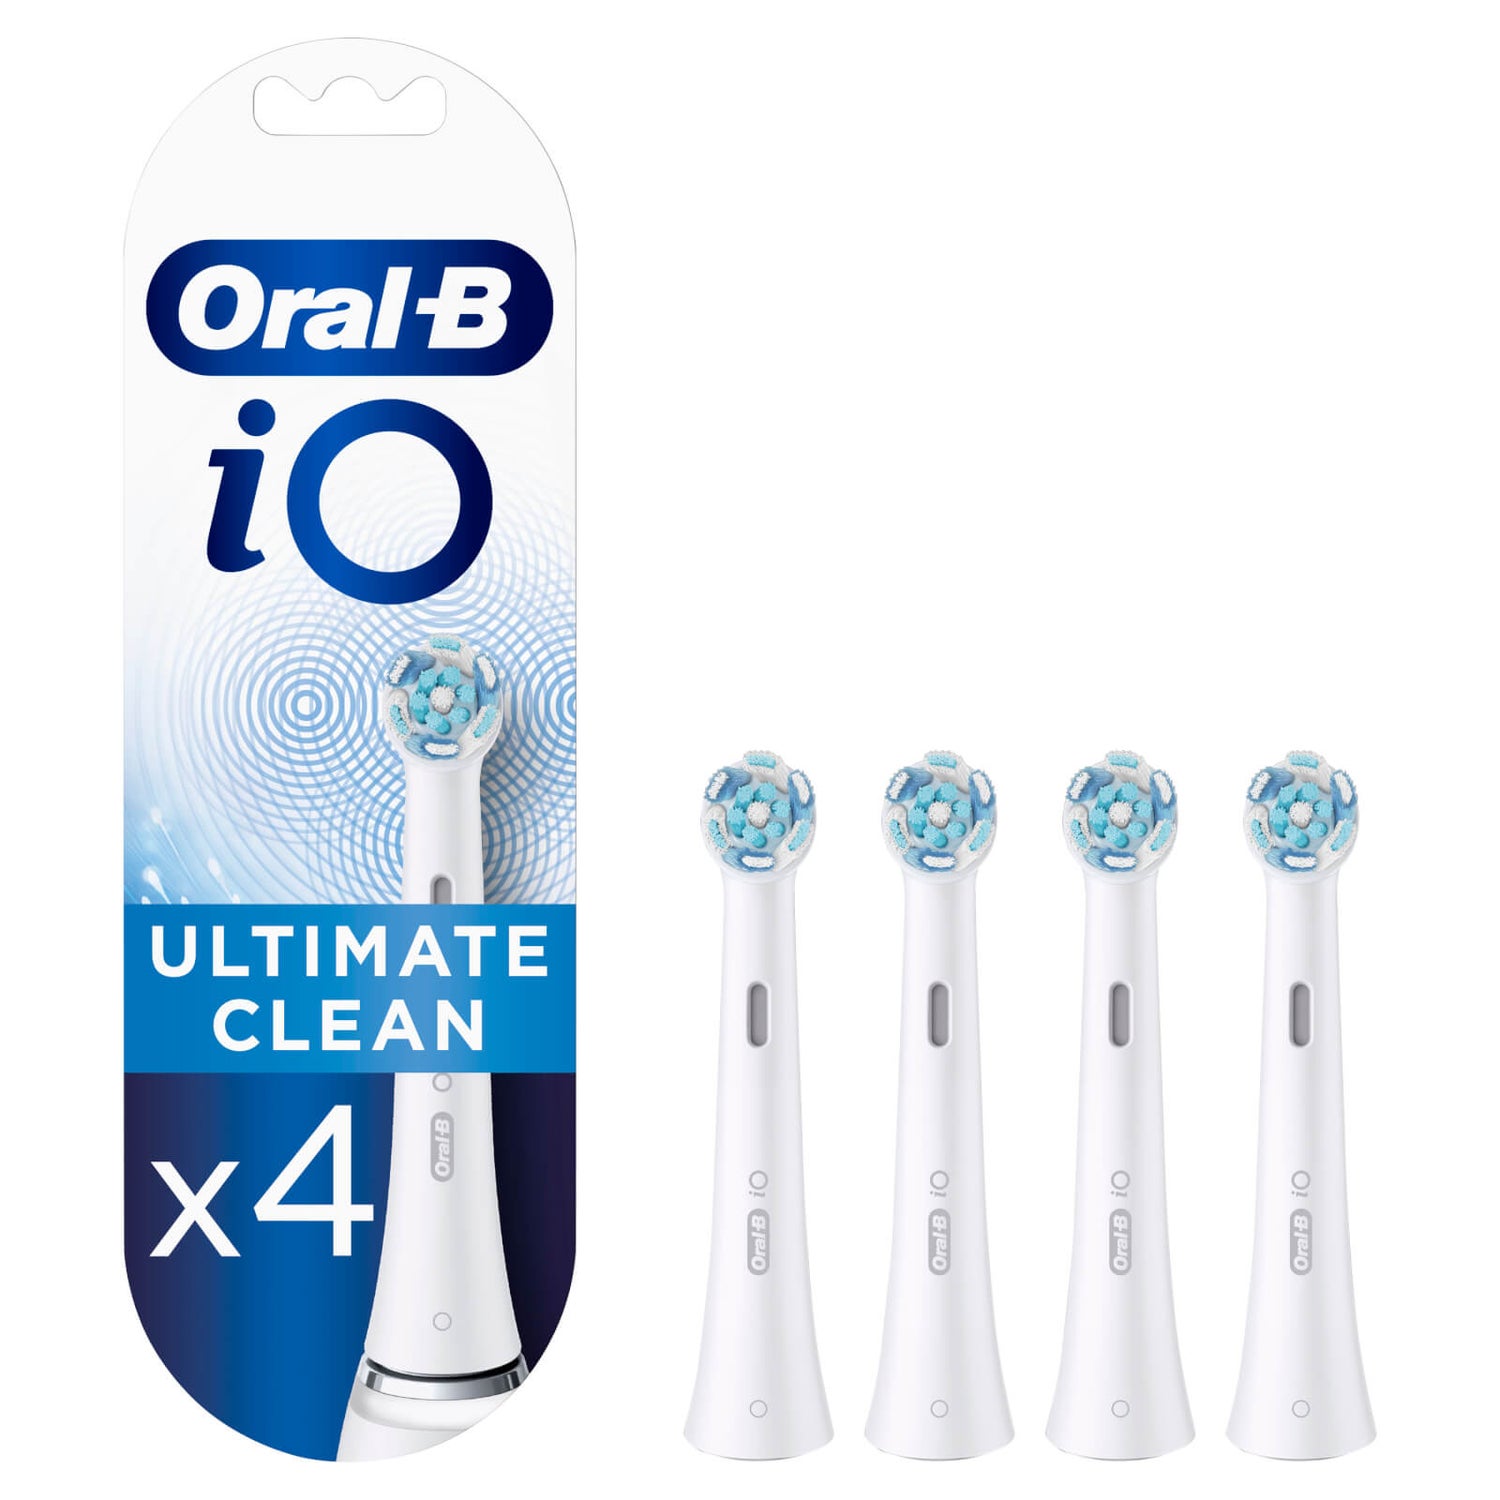 Oral B iO Ultimate Clean White Toothbrush Heads, Pack of 4 Counts